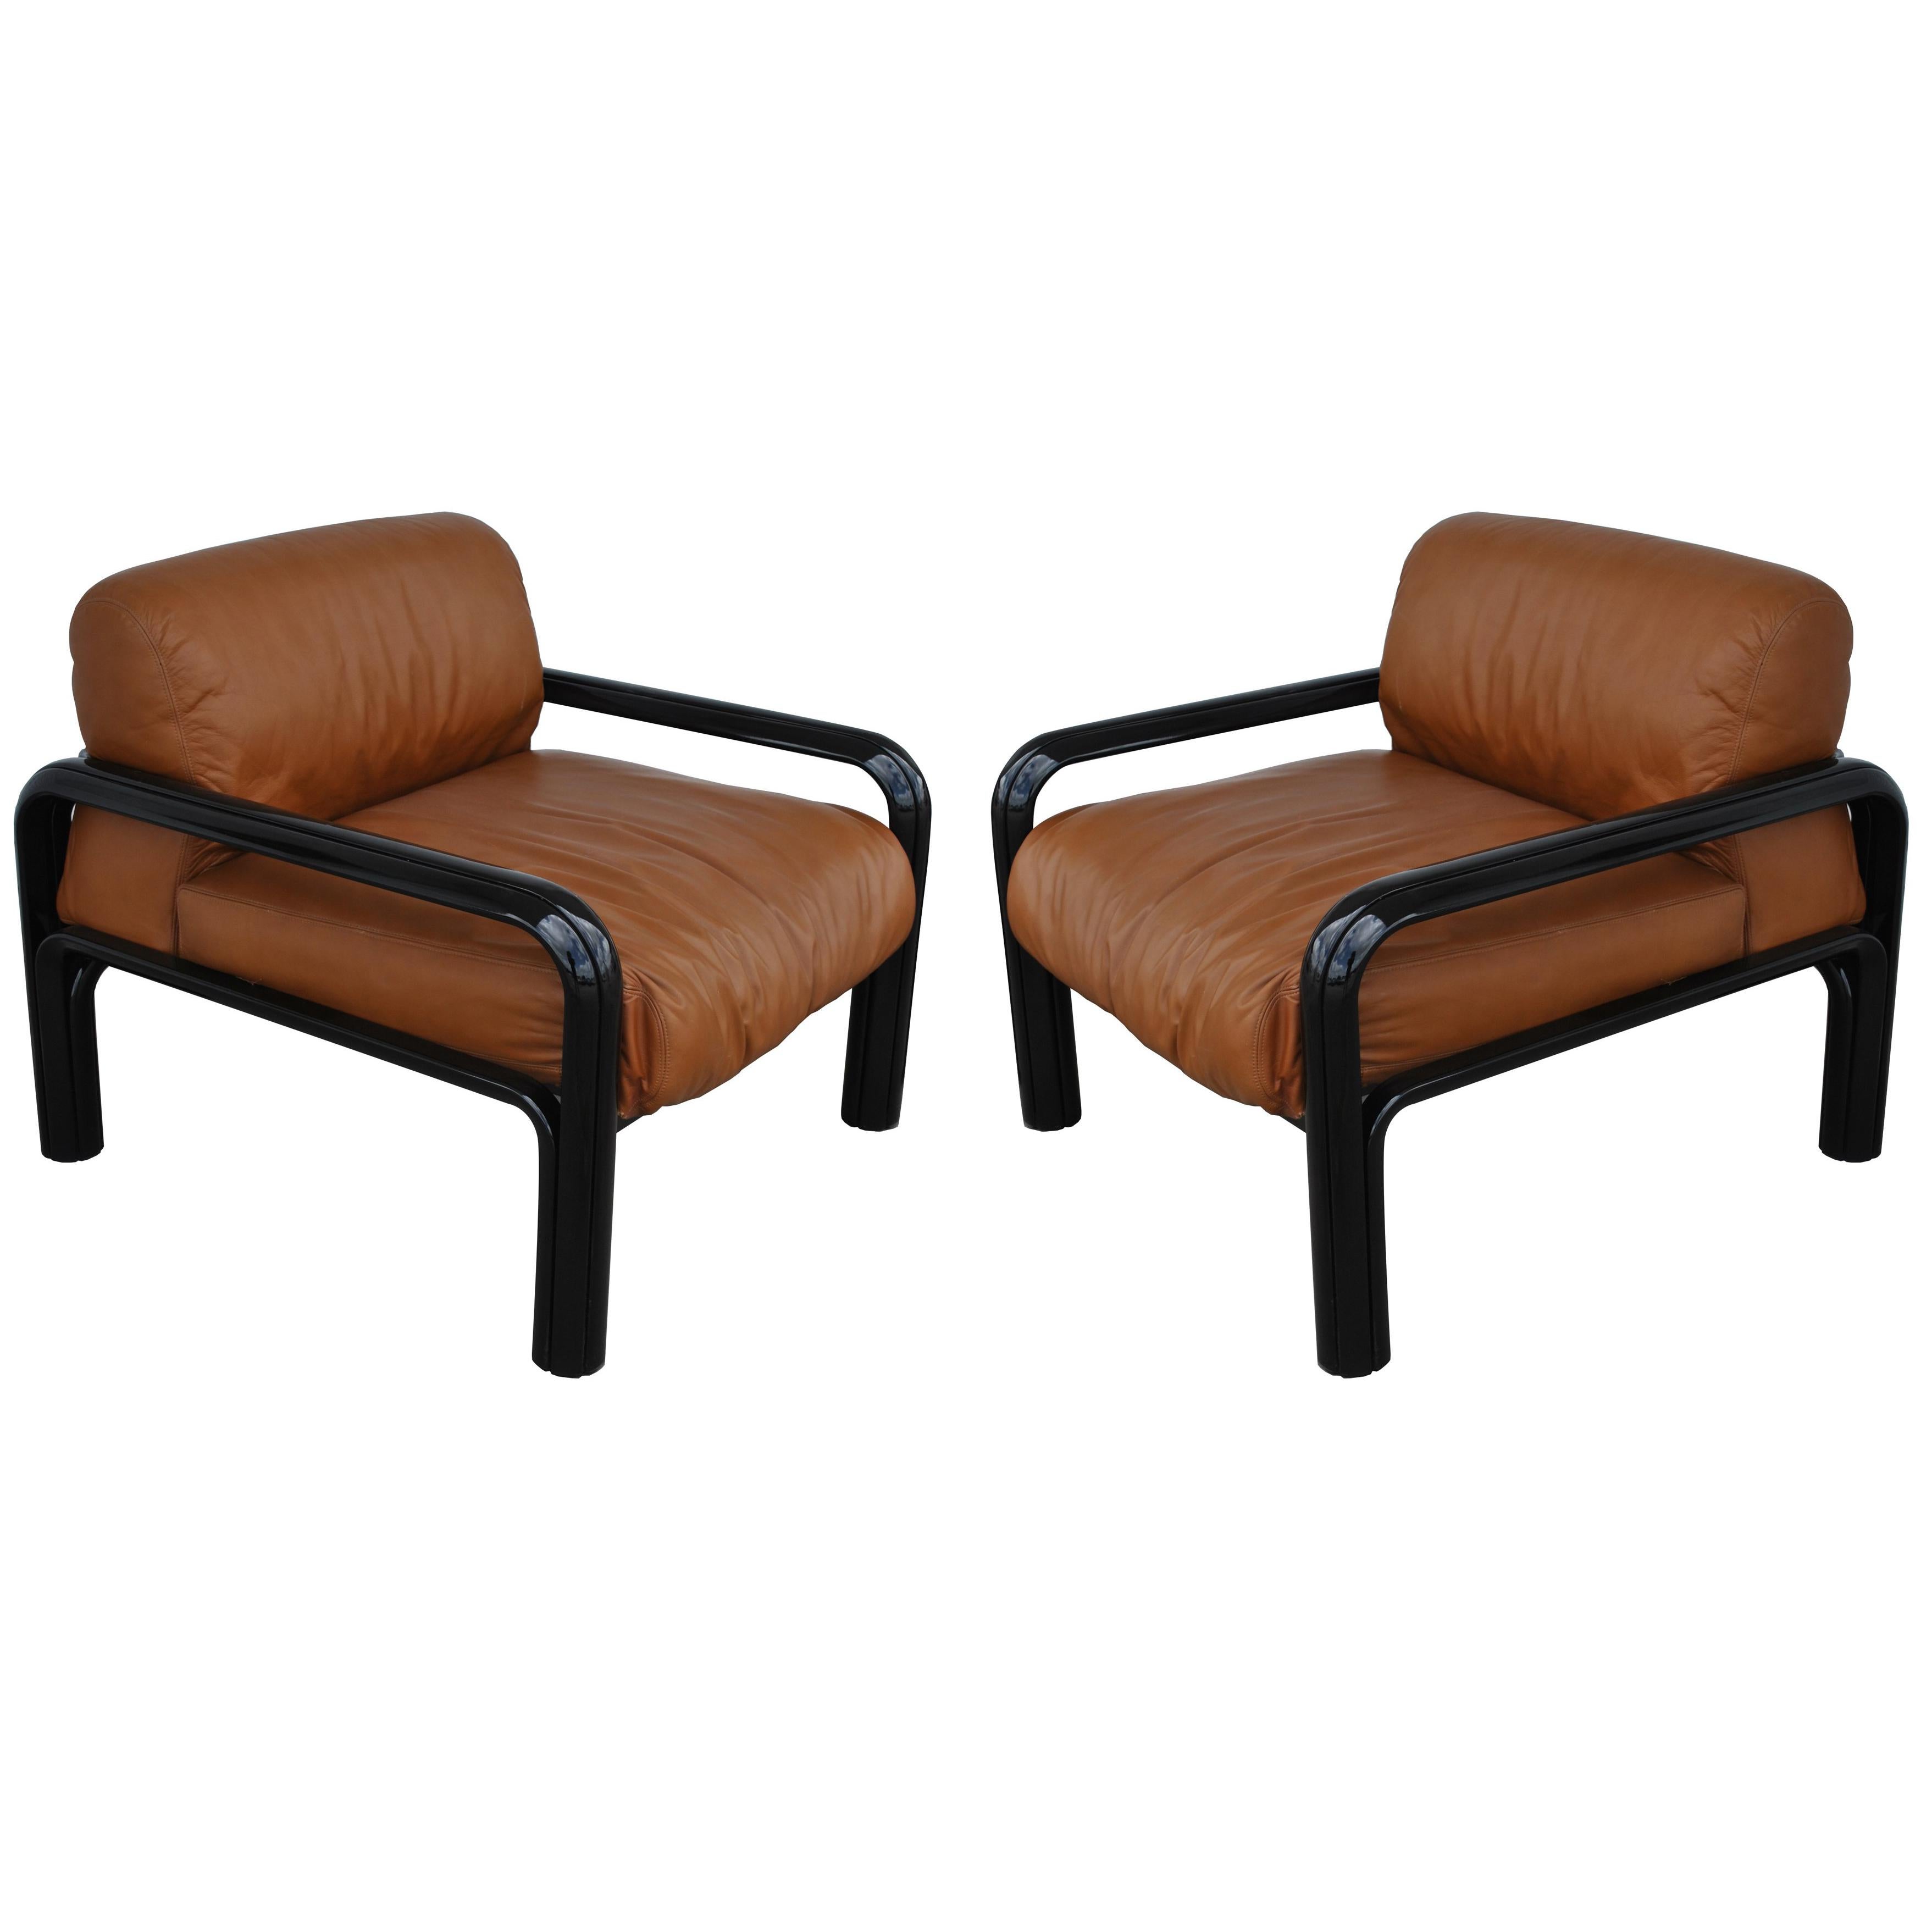 Pair of Knoll Midcentury Gae Aulenti Lounge Chairs